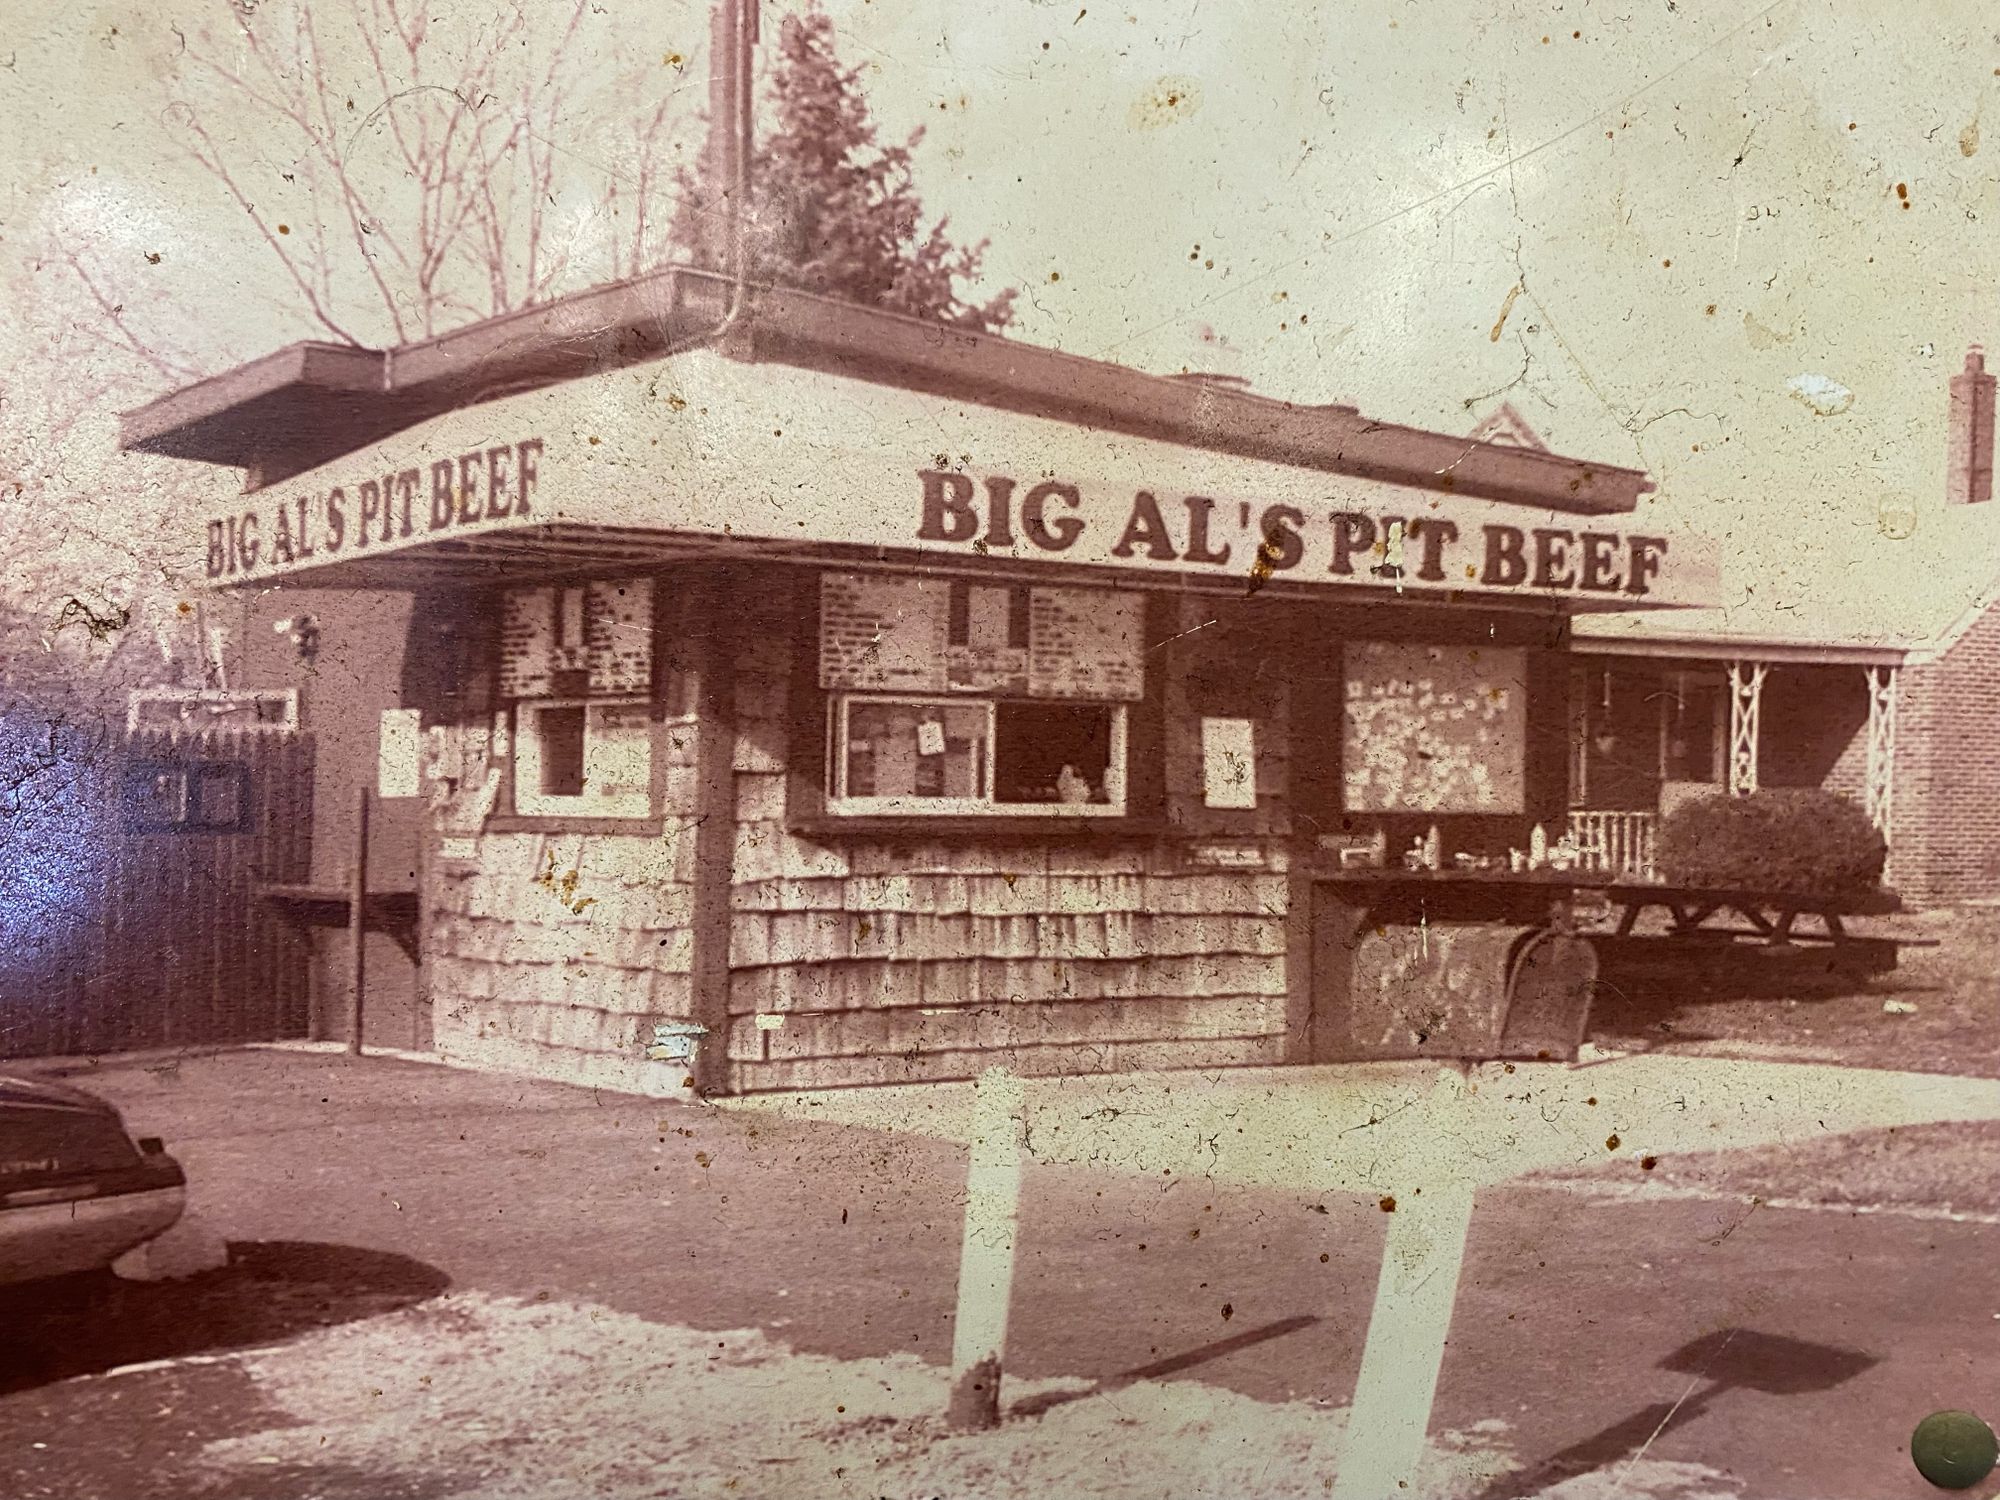 Faded photo of Big Al's Pit Beef shack from the 1980s.